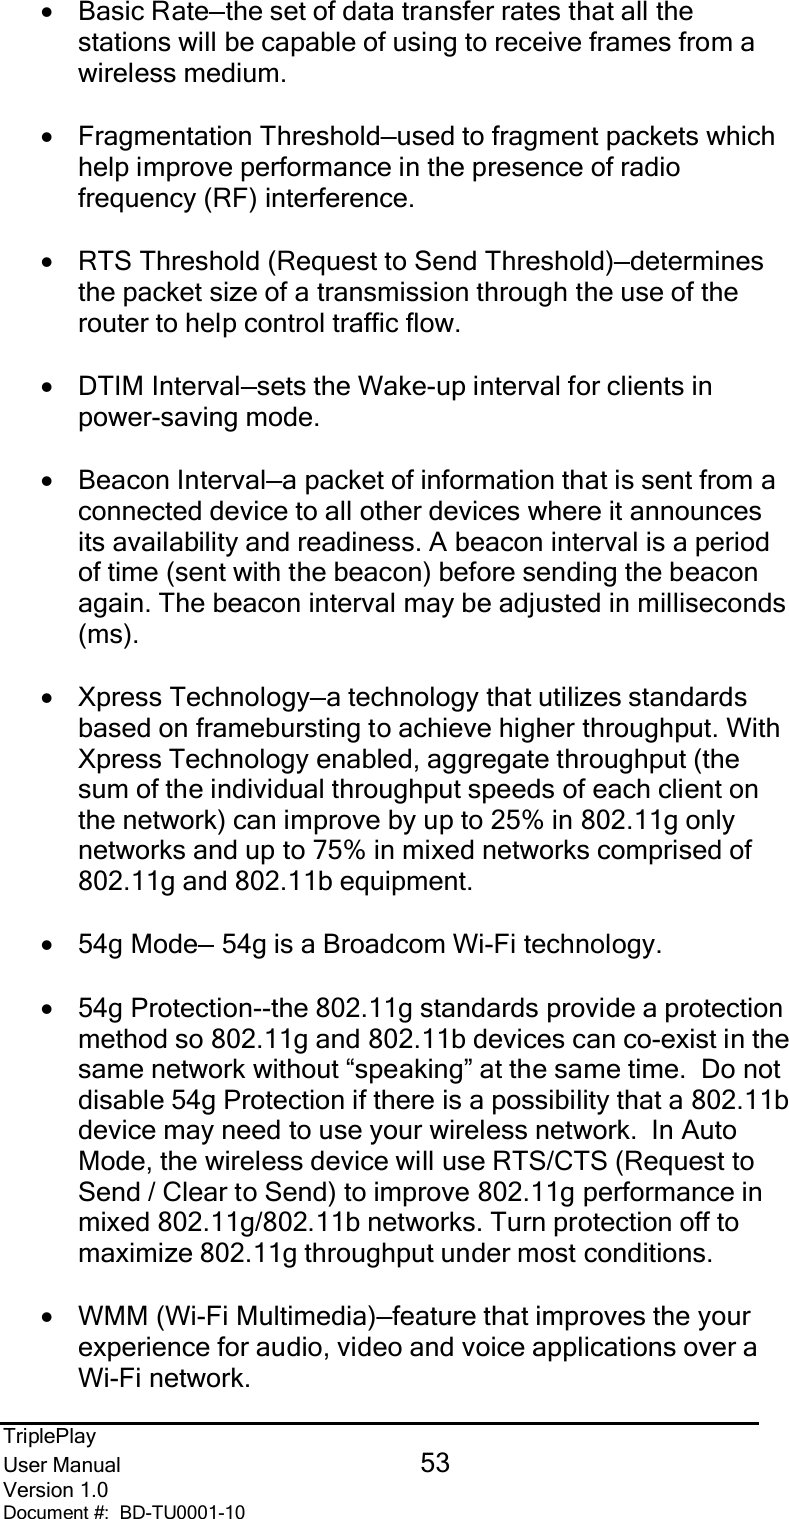 TriplePlayUser Manual 53Version 1.0Document #:  BD-TU0001-10•Basic Rate—the set of data transfer rates that all thestations will be capable of using to receive frames from awireless medium.•Fragmentation Threshold—used to fragment packets whichhelp improve performance in the presence of radiofrequency (RF) interference.•RTS Threshold (Request to Send Threshold)—determinesthe packet size of a transmission through the use of therouter to help control traffic flow.•DTIM Interval—sets the Wake-up interval for clients inpower-saving mode.•Beacon Interval—a packet of information that is sent from aconnected device to all other devices where it announcesits availability and readiness. A beacon interval is a periodof time (sent with the beacon) before sending the beaconagain. The beacon interval may be adjusted in milliseconds(ms).•Xpress Technology—a technology that utilizes standardsbased on framebursting to achieve higher throughput. WithXpress Technology enabled, aggregate throughput (thesum of the individual throughput speeds of each client onthe network) can improve by up to 25% in 802.11g onlynetworks and up to 75% in mixed networks comprised of802.11g and 802.11b equipment.•54g Mode— 54g is a Broadcom Wi-Fi technology.•54g Protection--the 802.11g standards provide a protectionmethod so 802.11g and 802.11b devices can co-exist in thesame network without “speaking” at the same time.  Do notdisable 54g Protection if there is a possibility that a 802.11bdevice may need to use your wireless network.  In AutoMode, the wireless device will use RTS/CTS (Request toSend / Clear to Send) to improve 802.11g performance inmixed 802.11g/802.11b networks. Turn protection off tomaximize 802.11g throughput under most conditions.•WMM (Wi-Fi Multimedia)—feature that improves the yourexperience for audio, video and voice applications over aWi-Fi network.